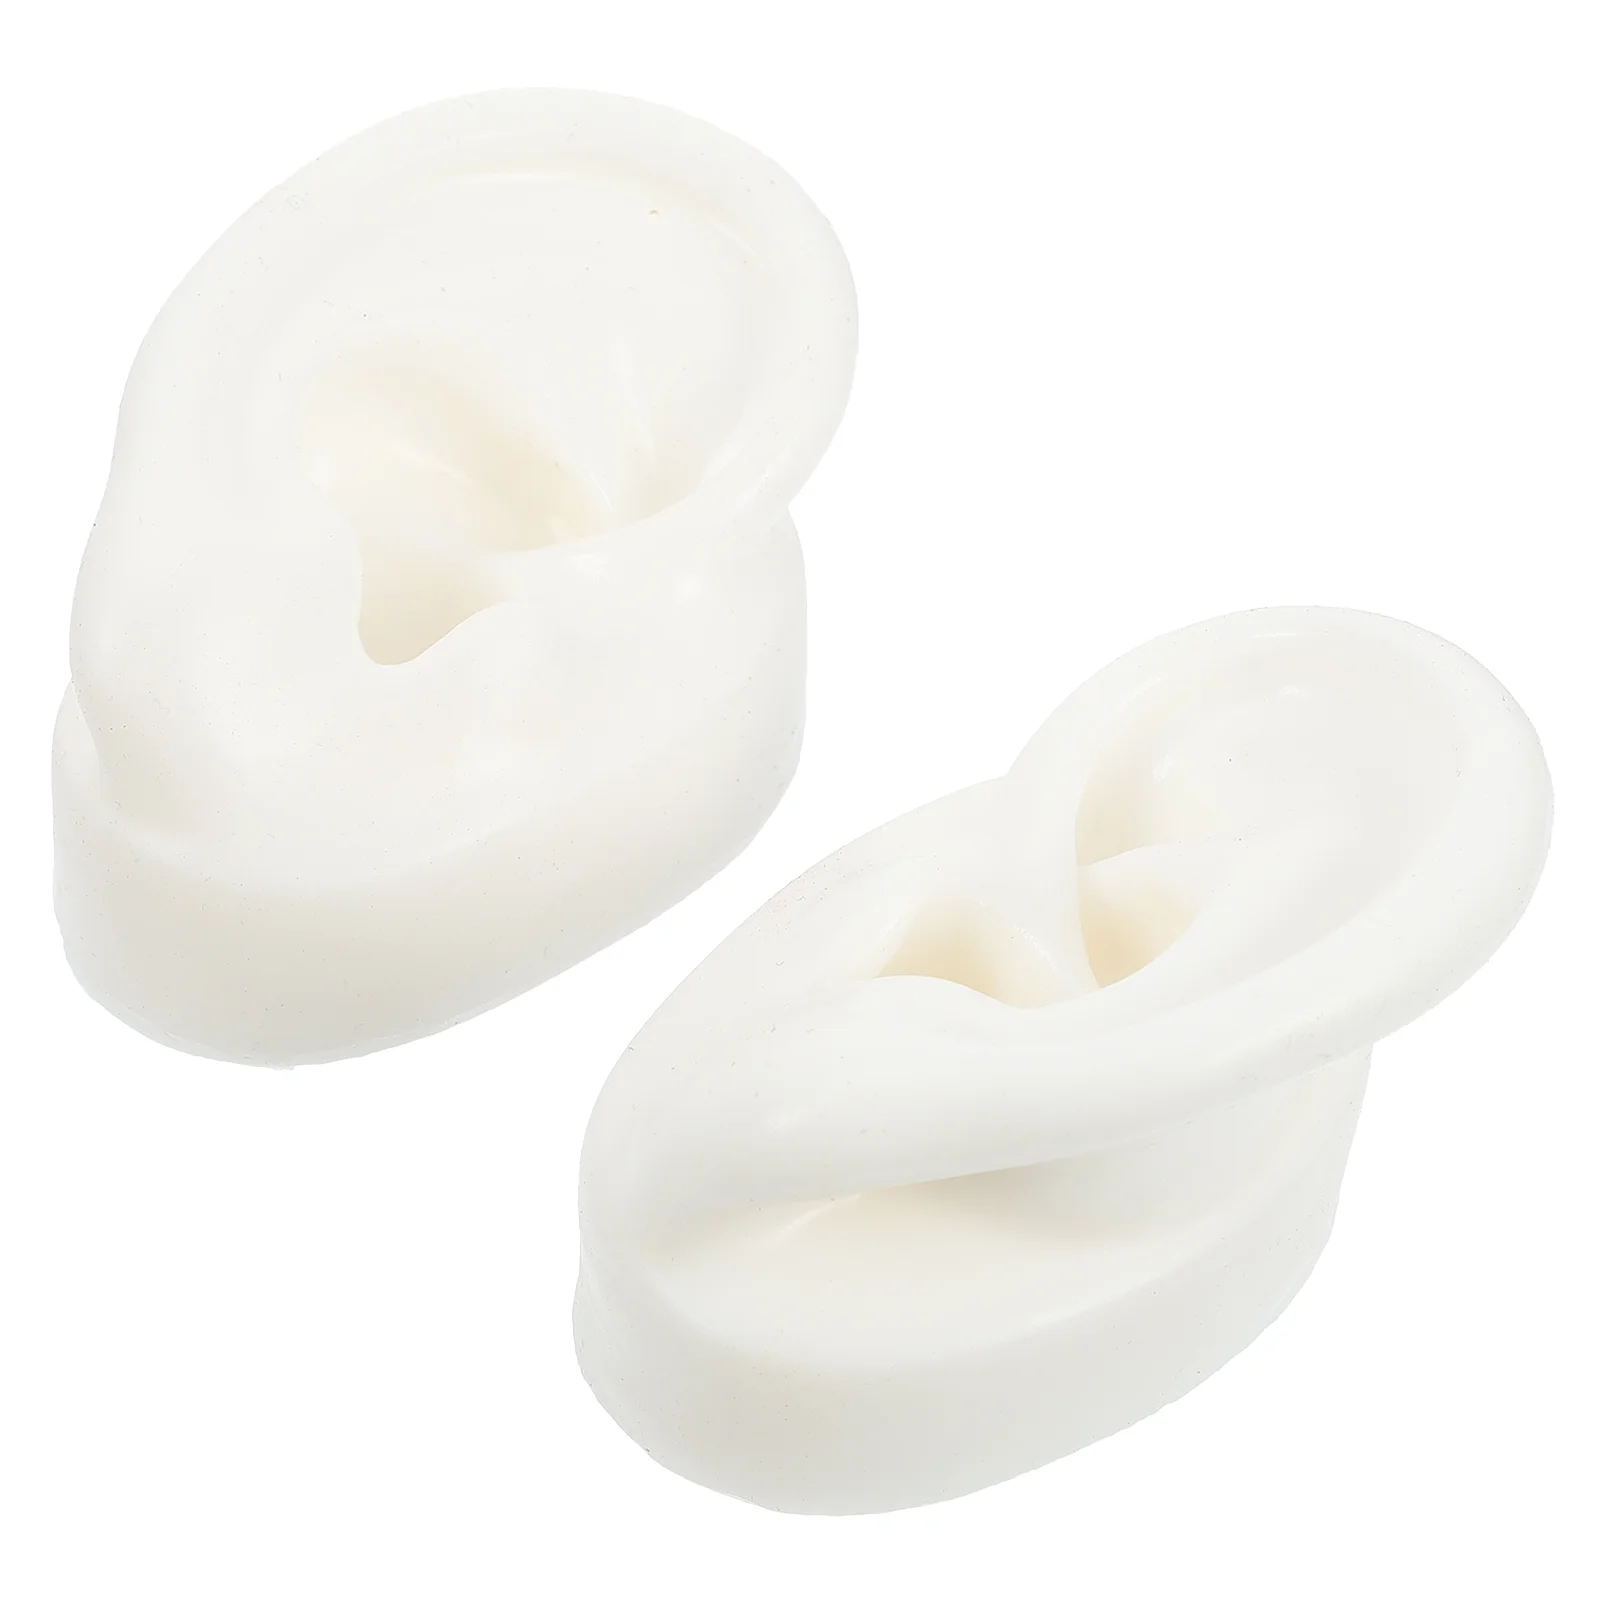 

1 Pair Artificial Ear Molds Silicone Ear Model Simulated Ear Molds for Studs Earring Display